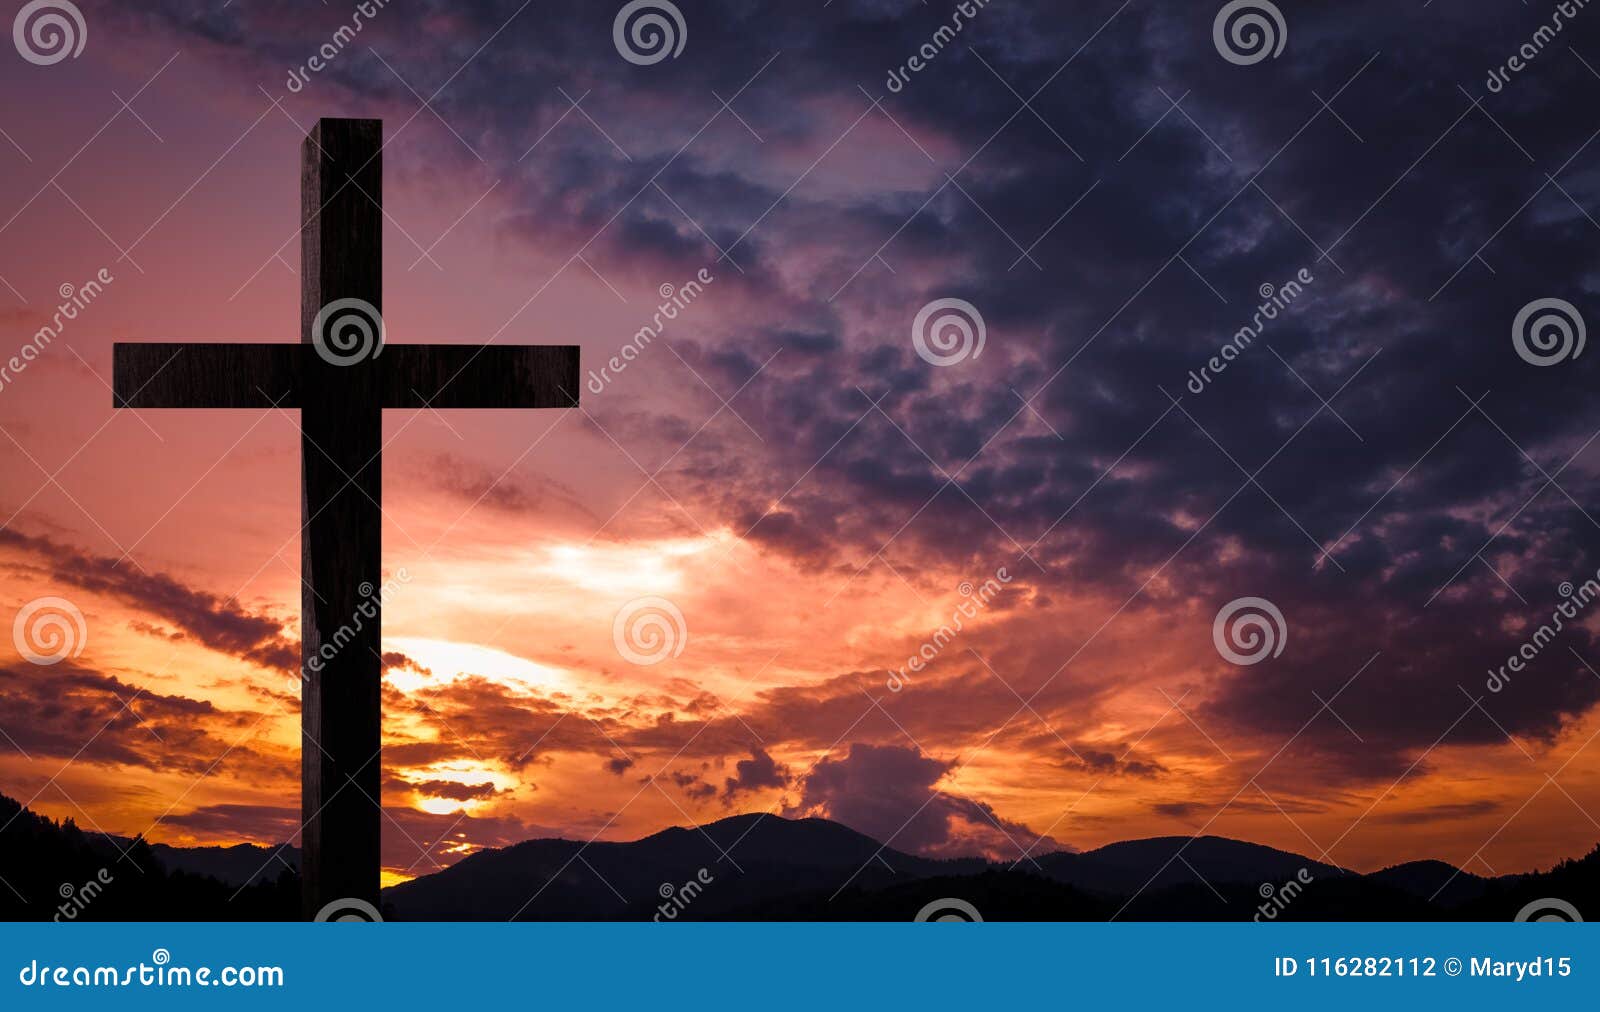 jesus christ cross, wooden crucifix on a heavenly background with dramatic light and clouds and colorful orange sunset